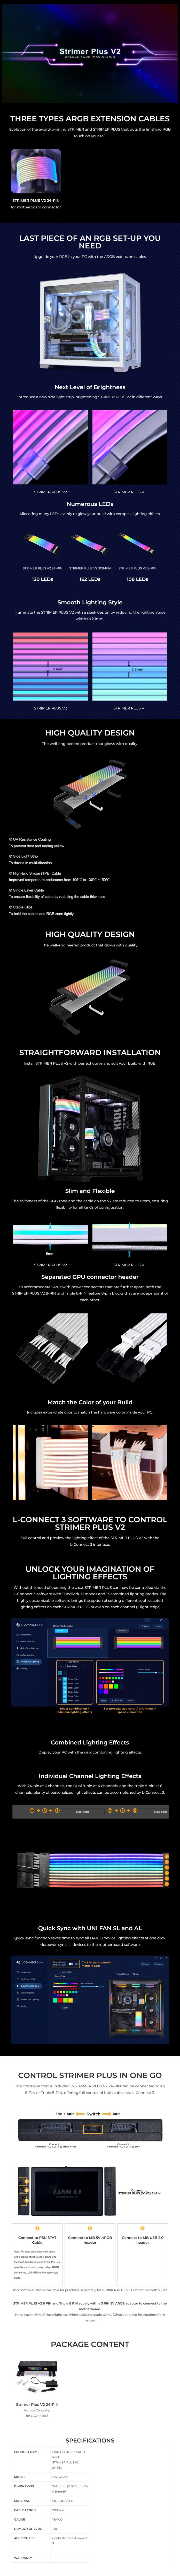 A large marketing image providing additional information about the product Lian Li Strimer Plus V2 8-Pin Double PCIe ARGB LED Extension Cable - Additional alt info not provided